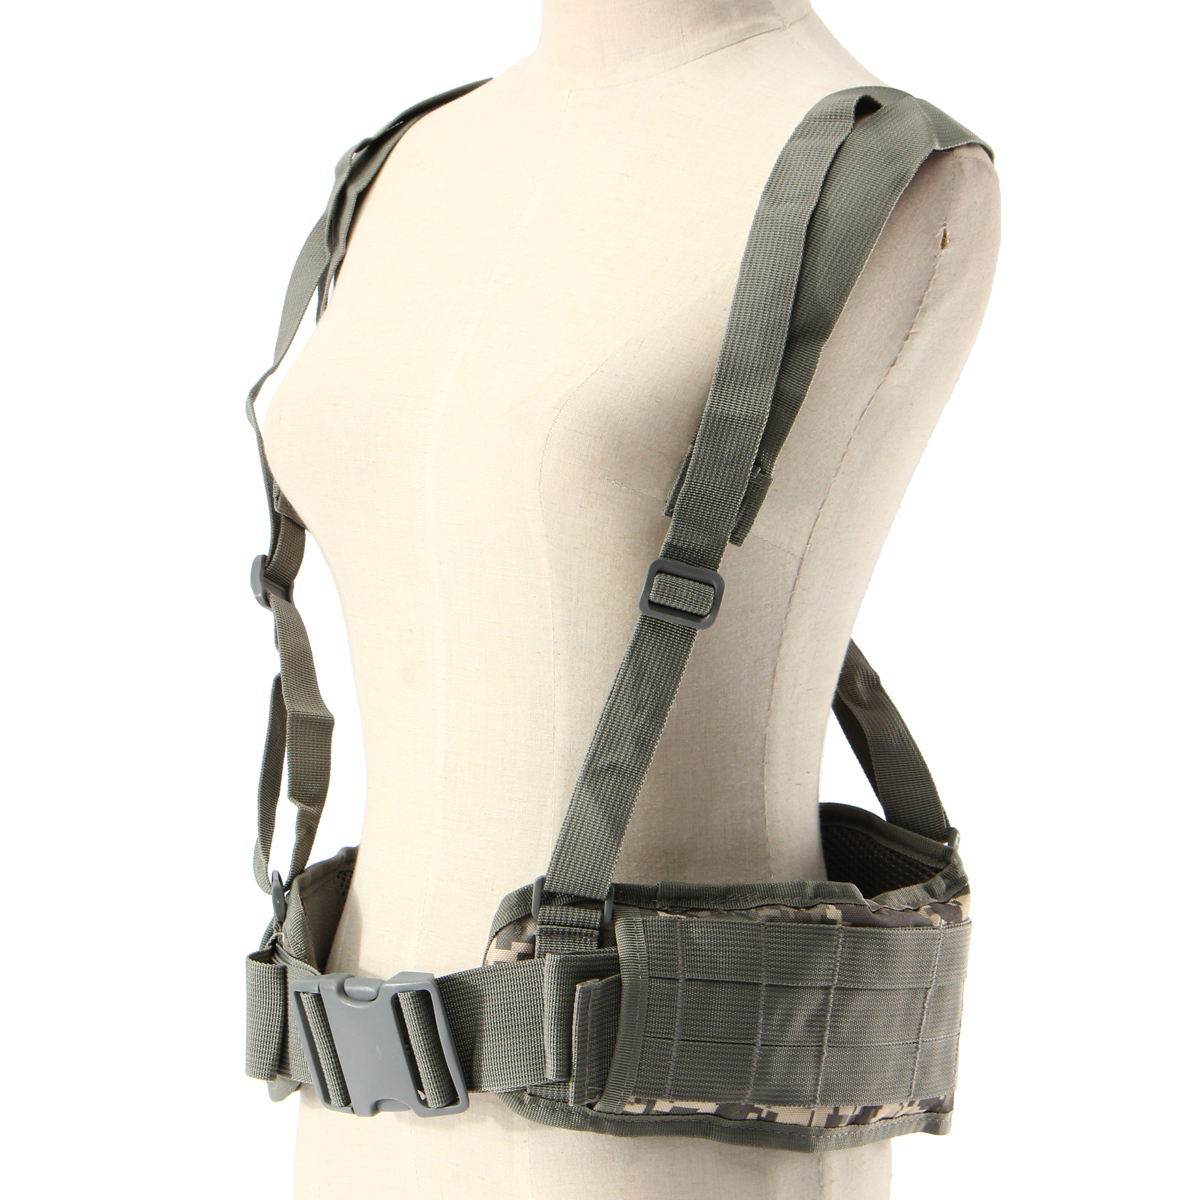 Military-Nylon-Molle-Waist-Combat-Belt-With-Harness-Tactical-Adjustable-Soft-Padded-Universal-Unisex-1817236-2